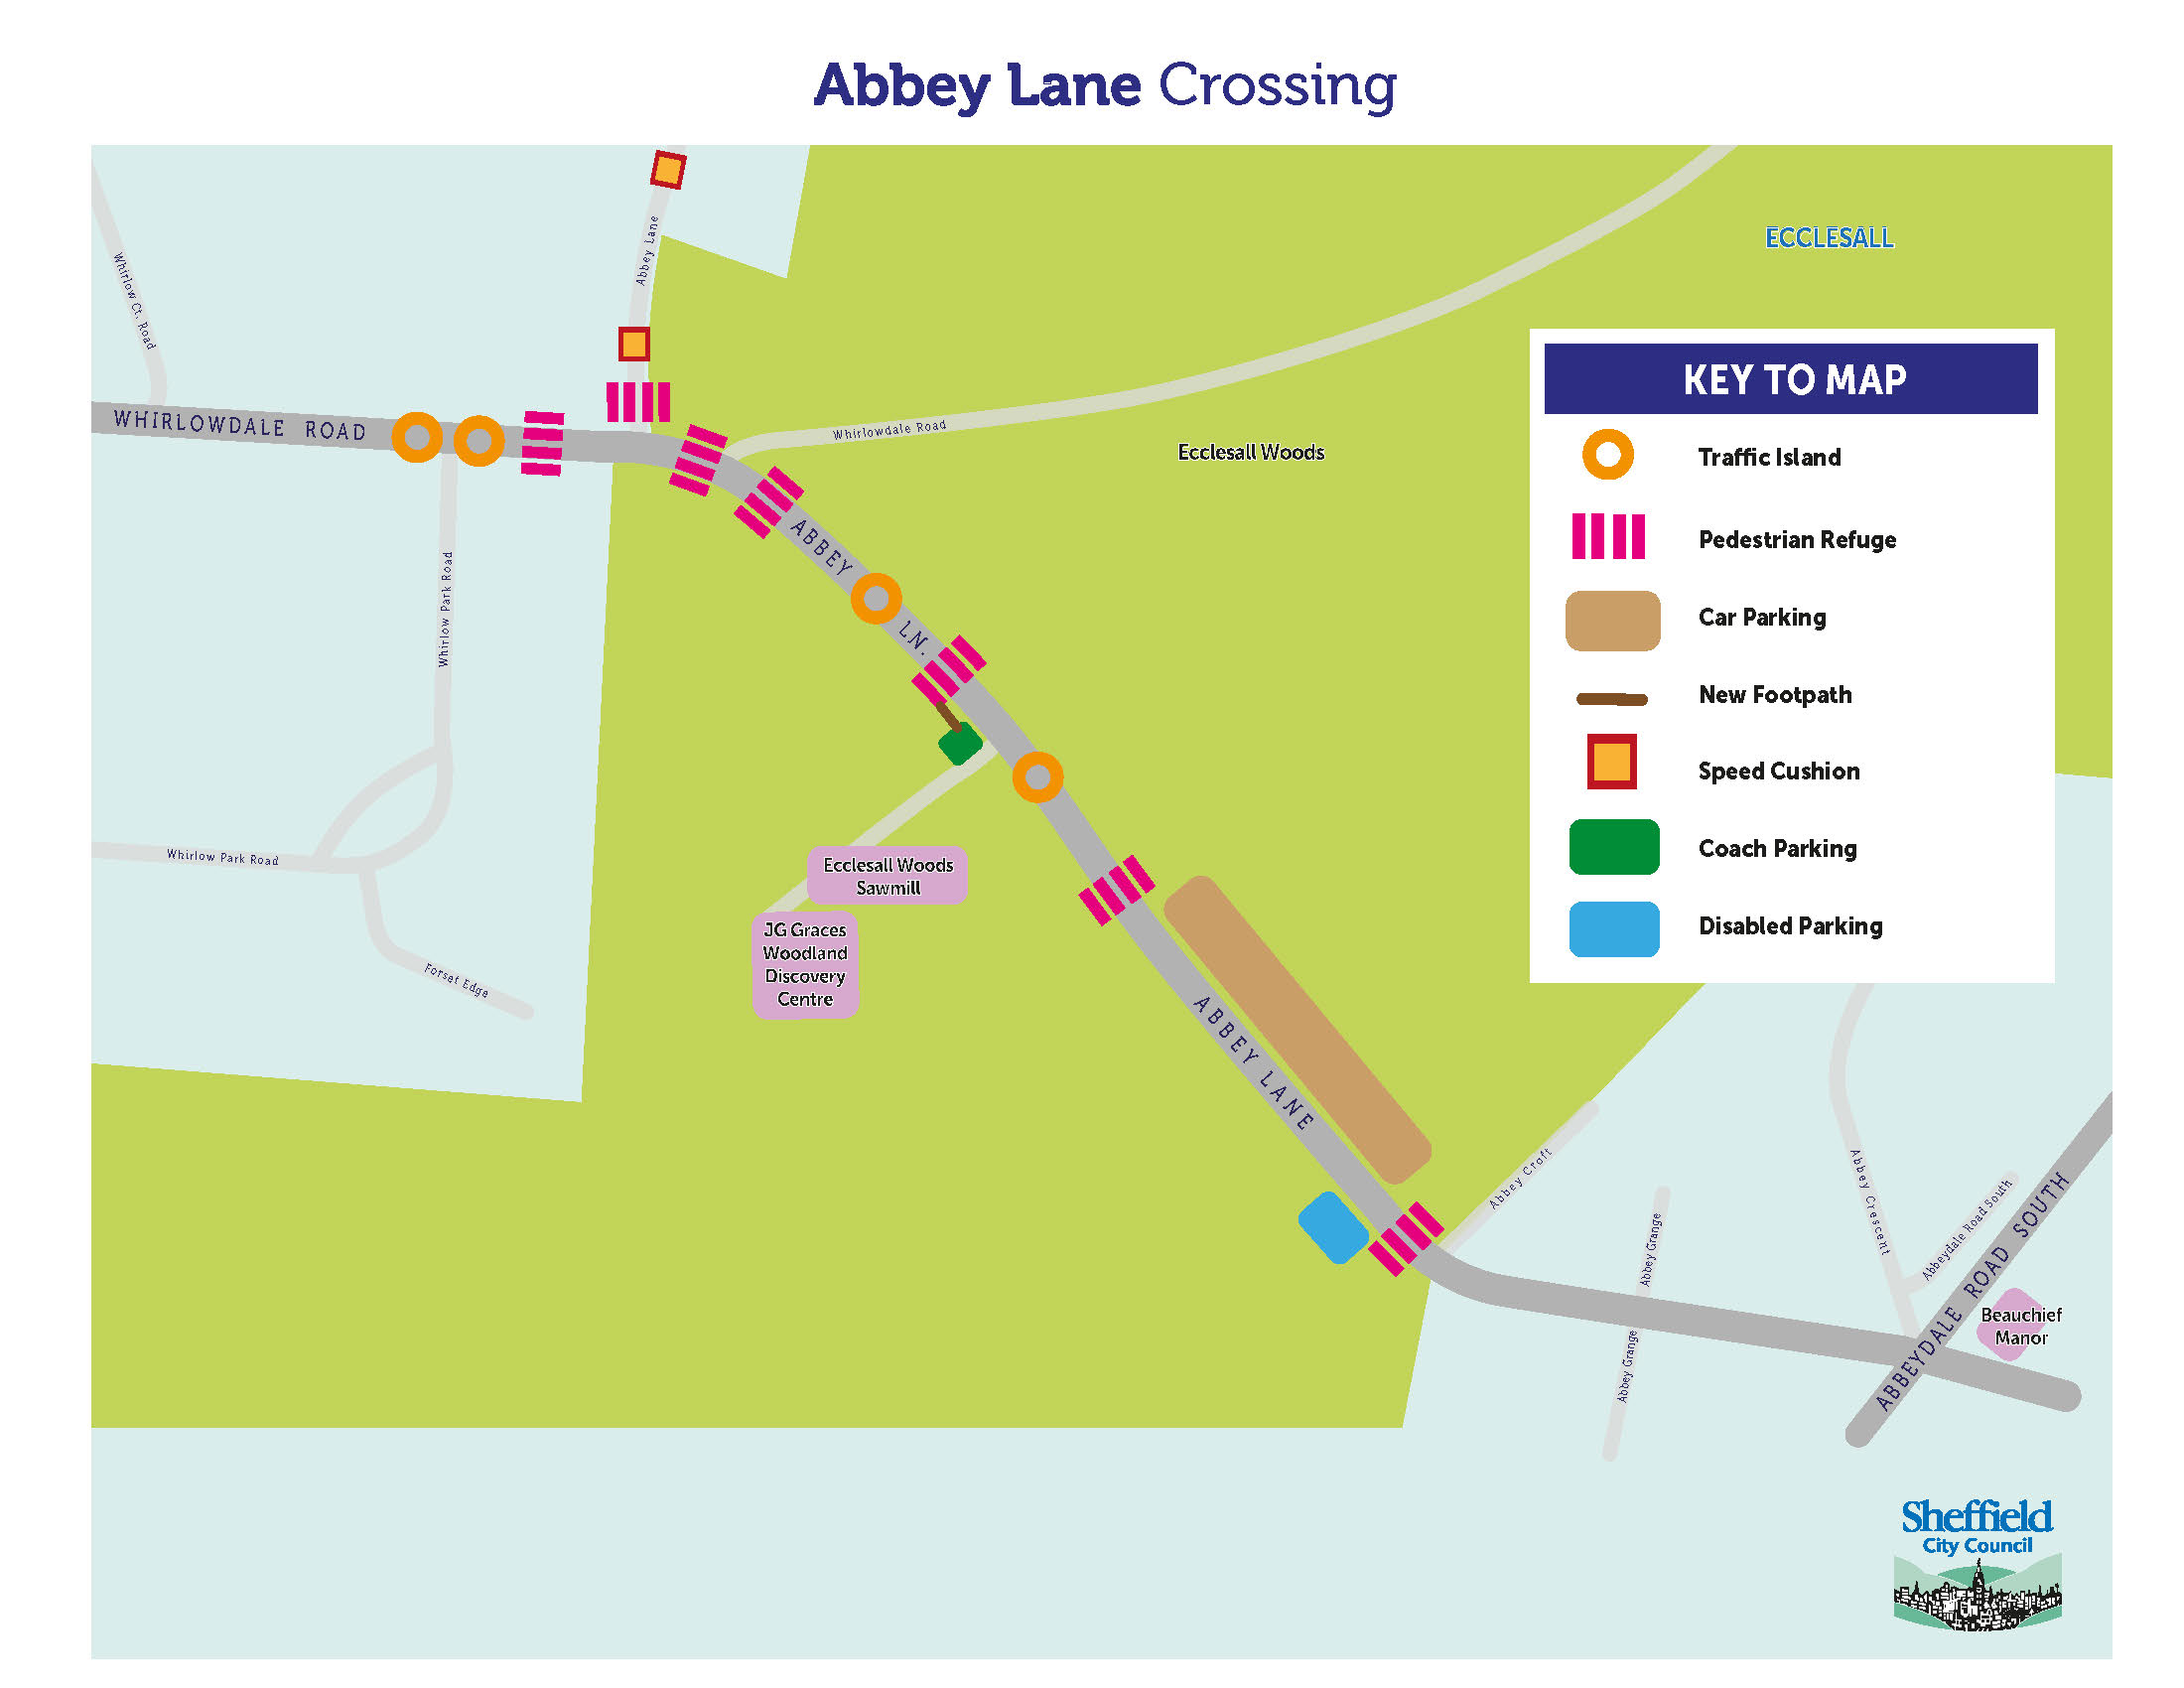 Map of the proposals in and around the Abbey Lane area